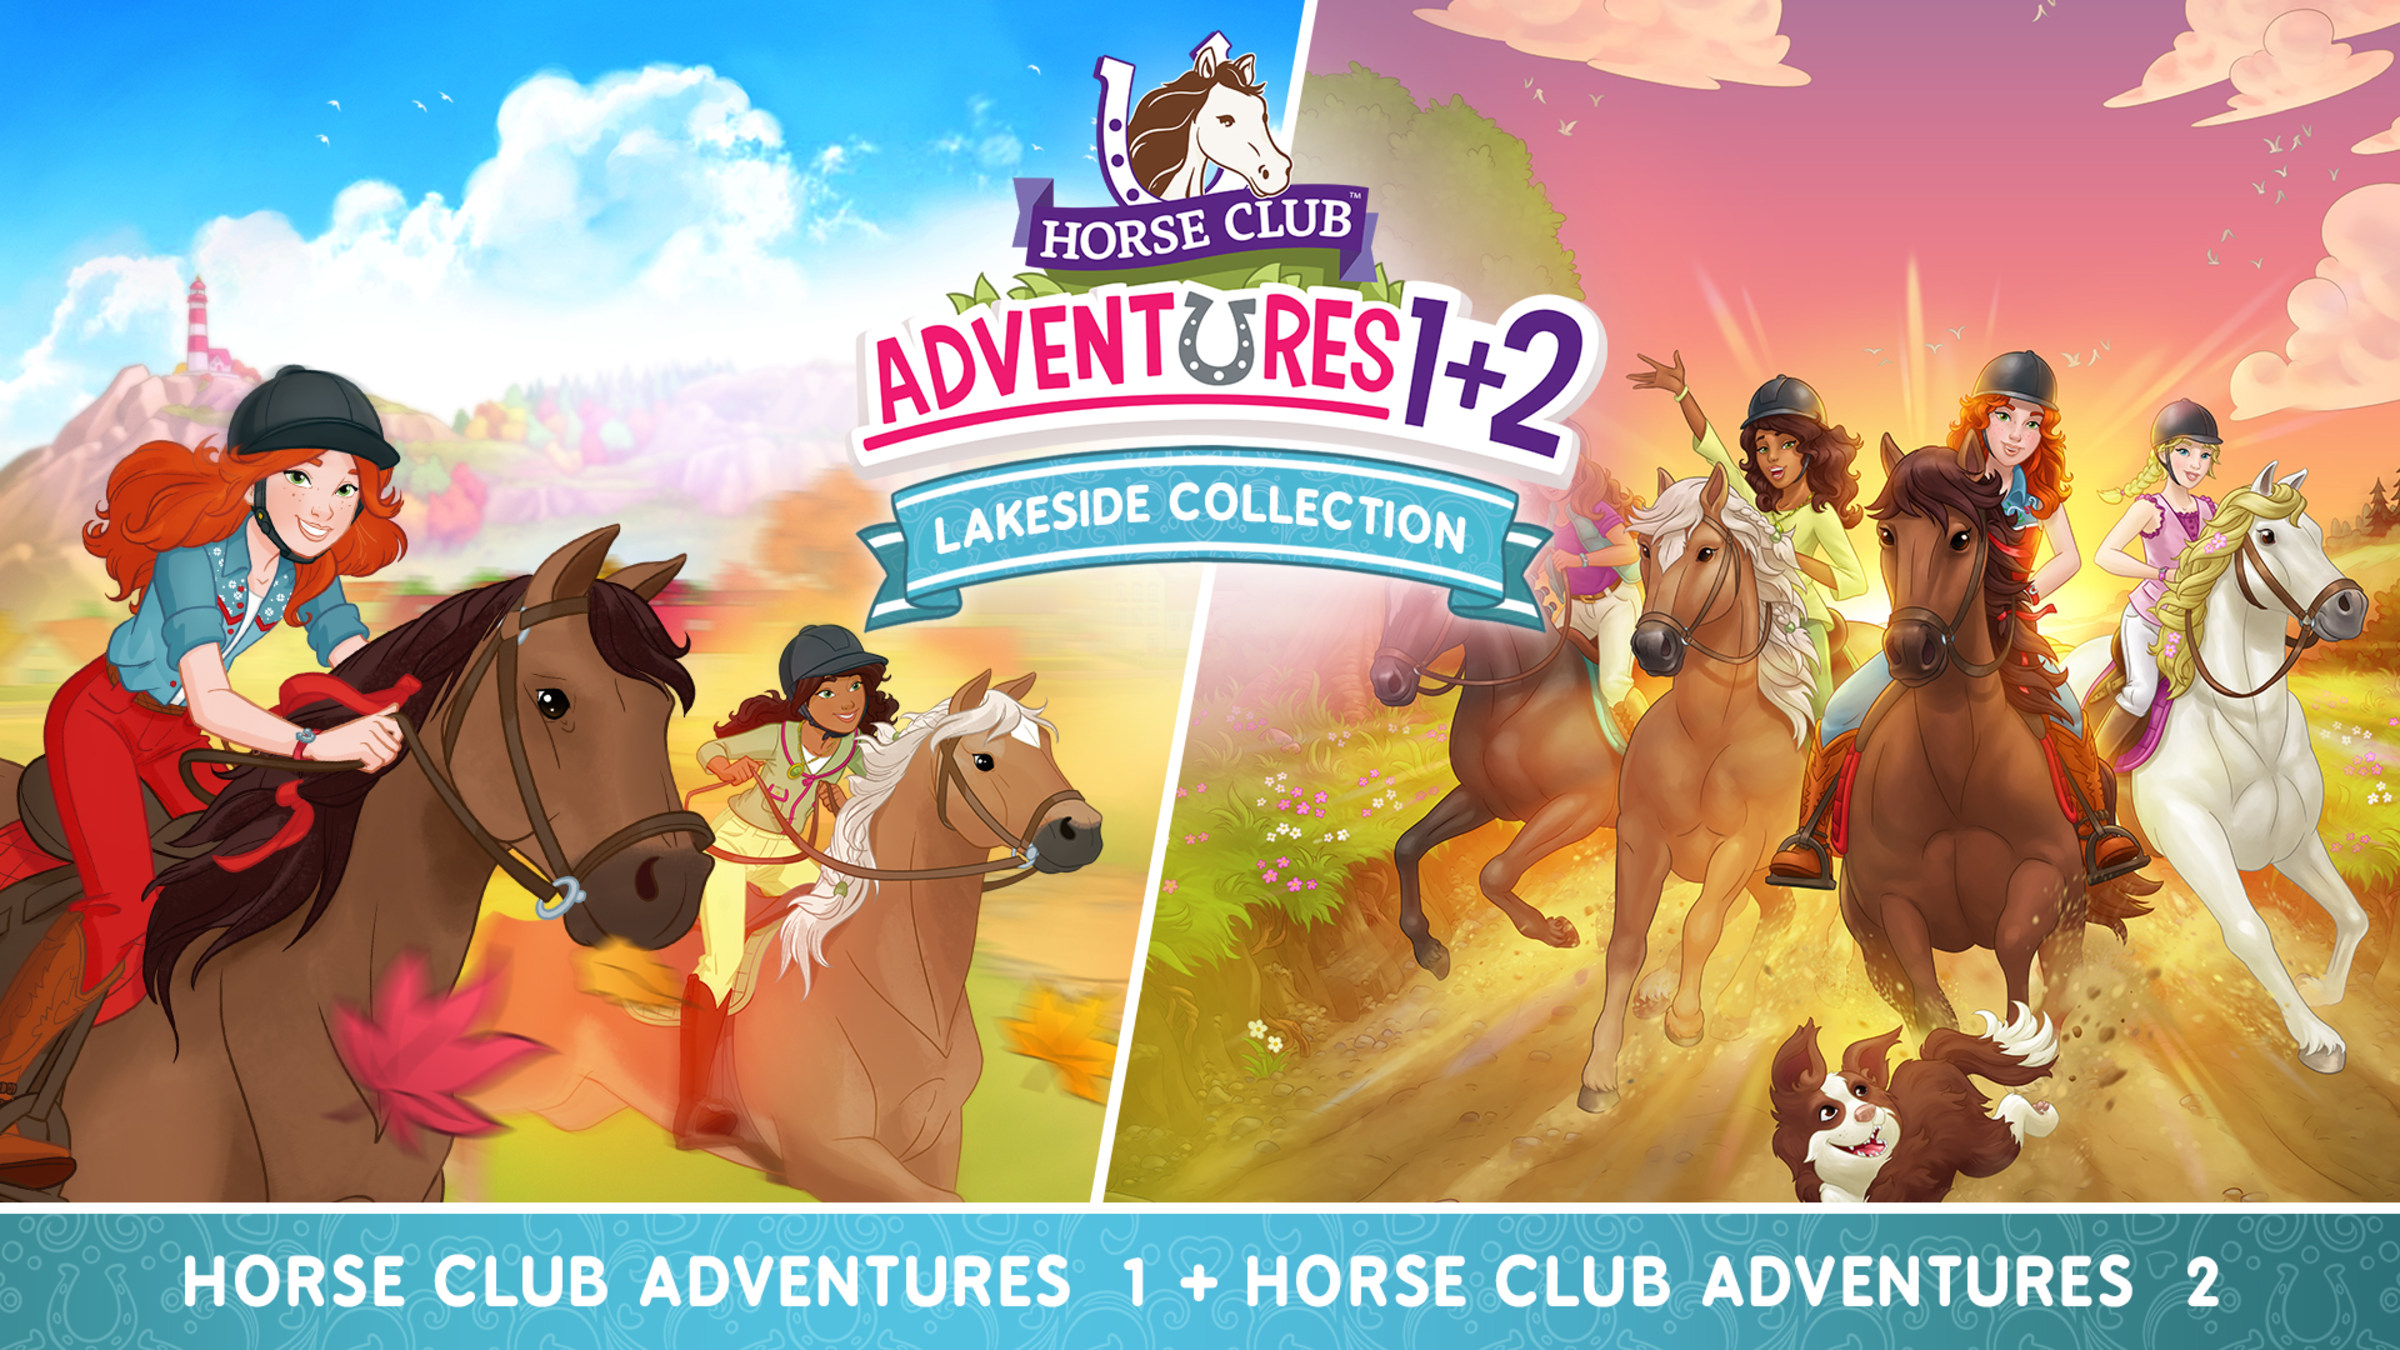 HORSE CLUB Site Switch Adventures: Nintendo - Official for Lakeside Collection Nintendo